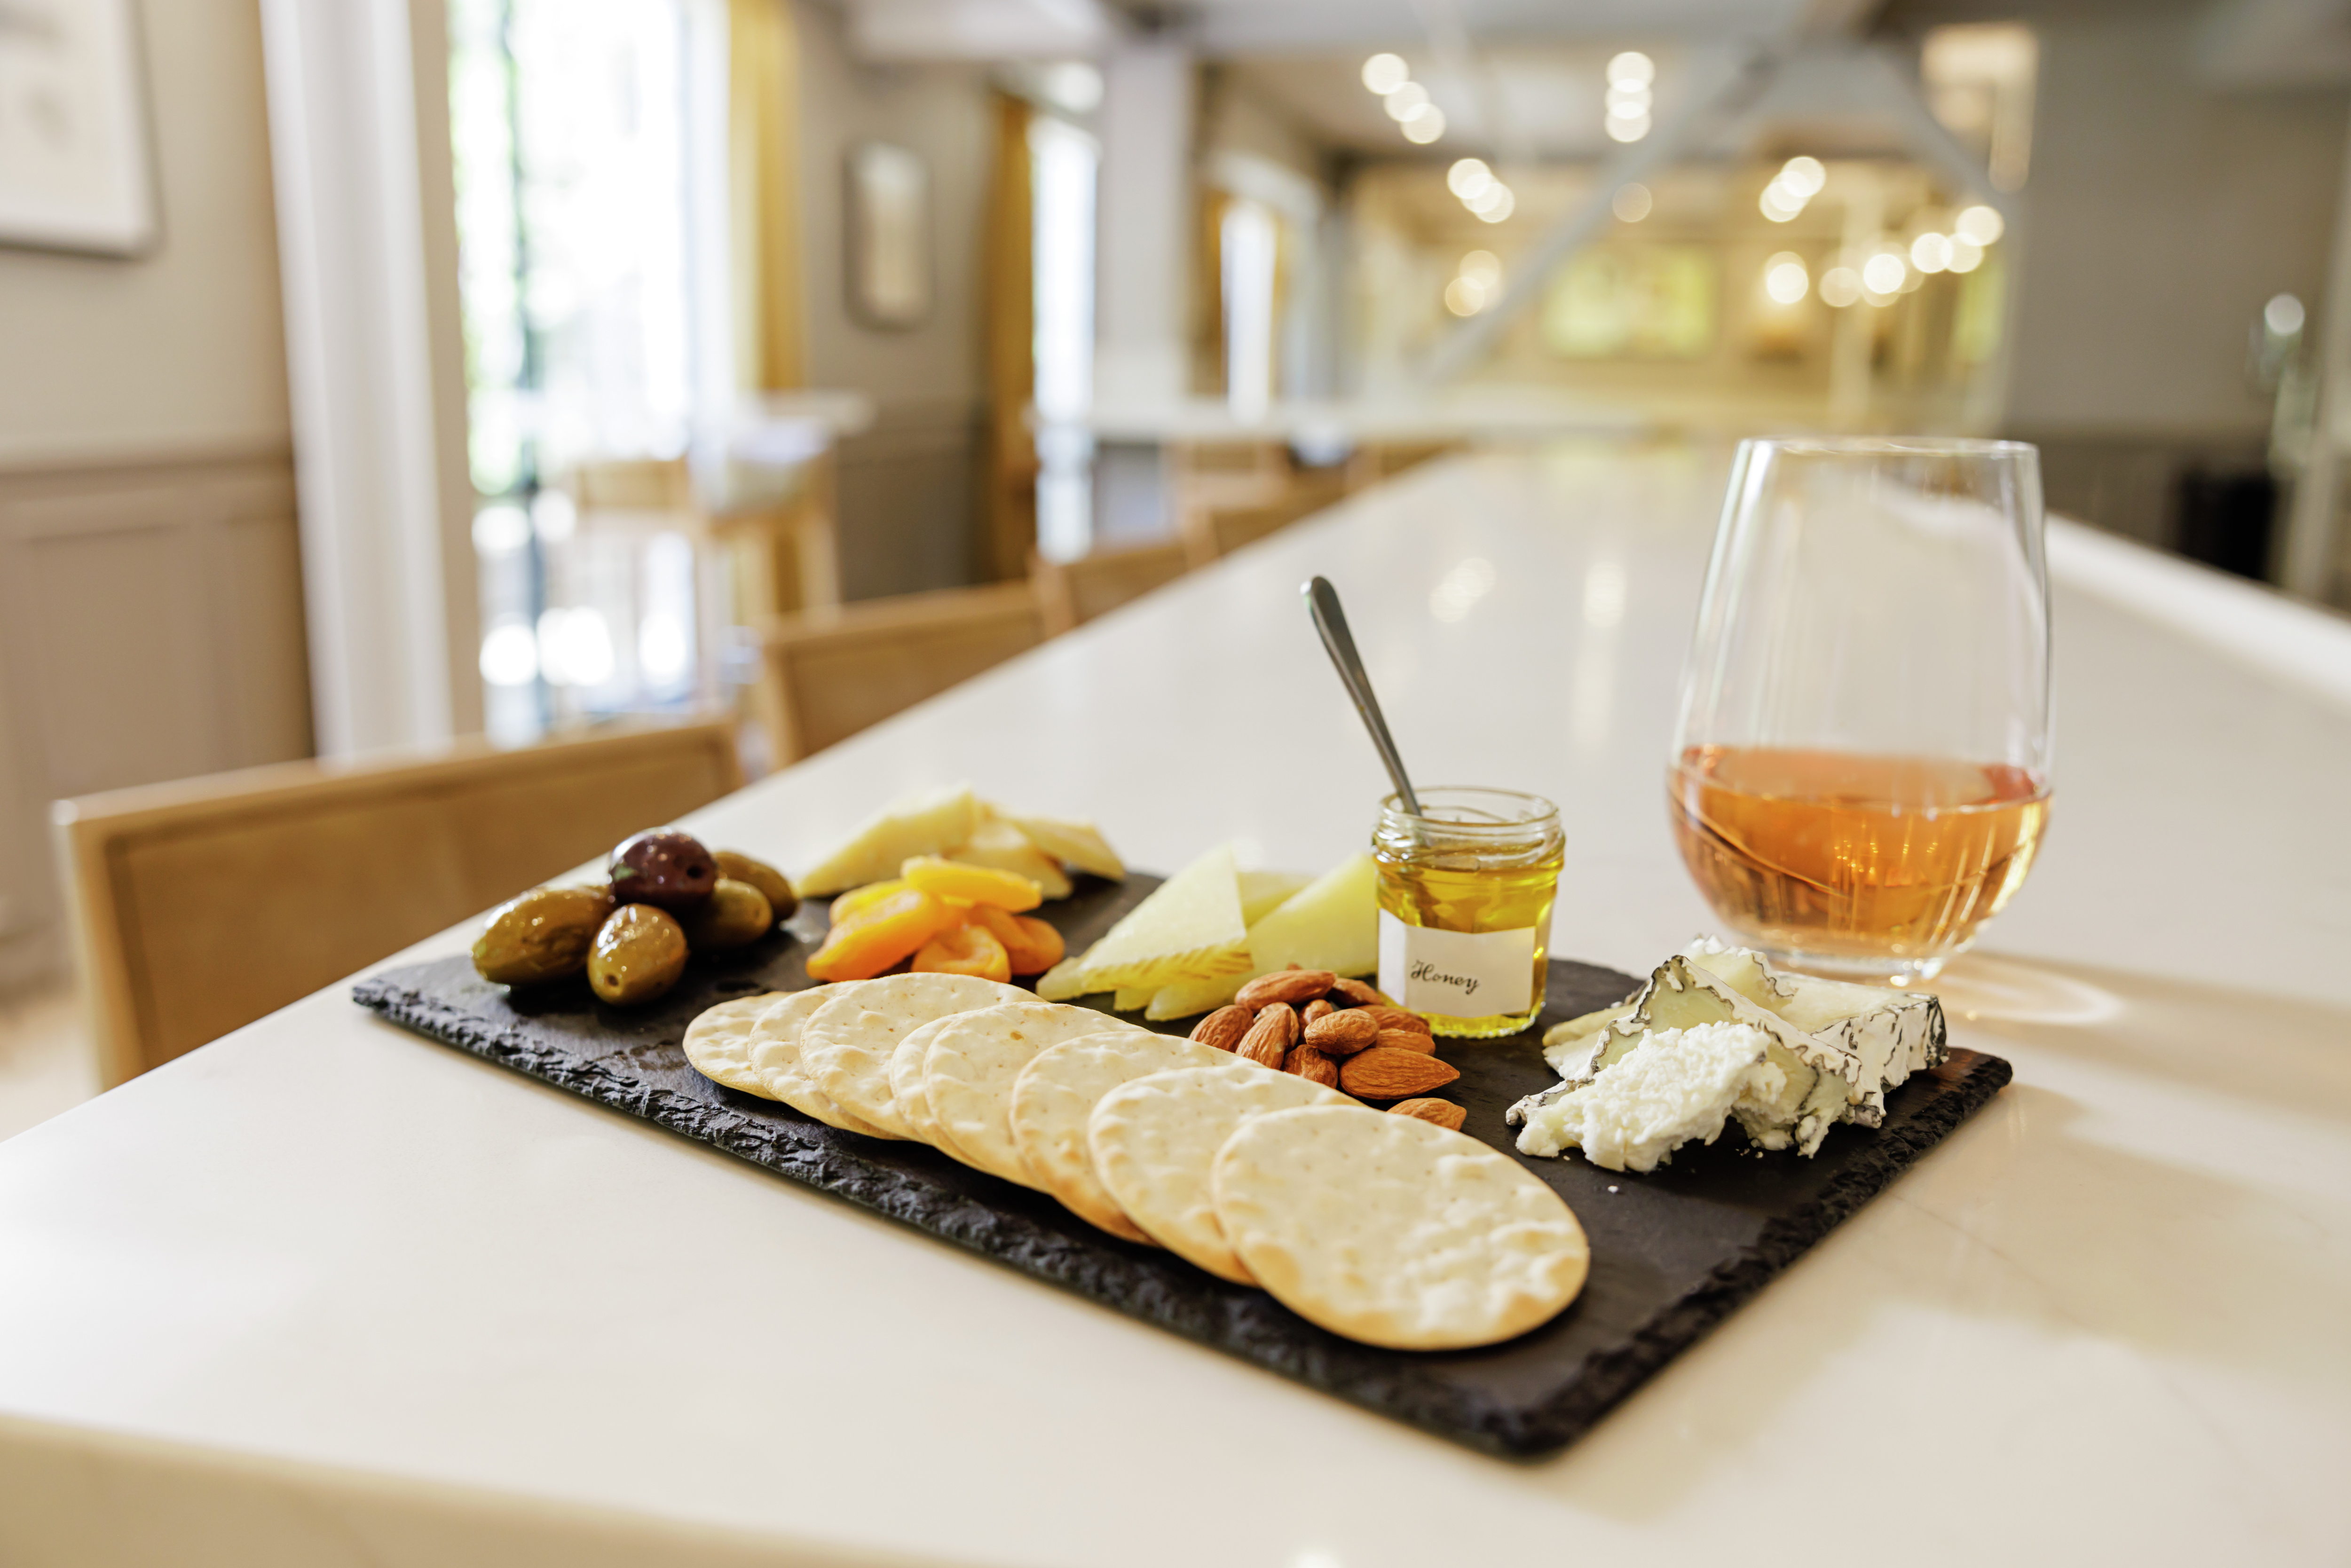 Cheese board on table, with drink